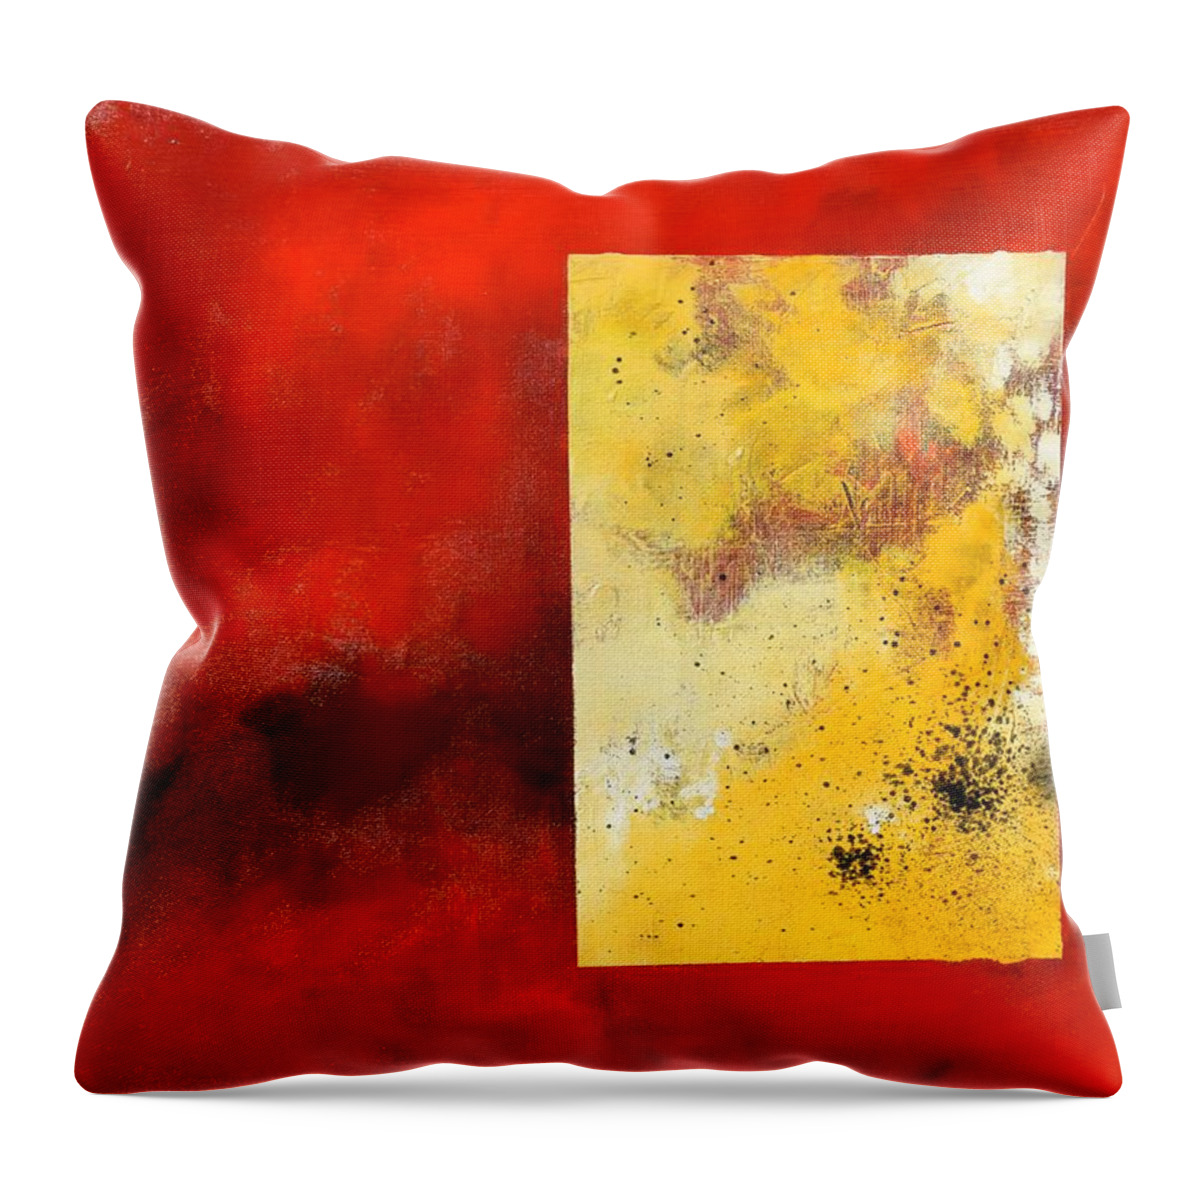 Lyrical Abstract Throw Pillow featuring the painting The beginning of a shape by Eduard Meinema